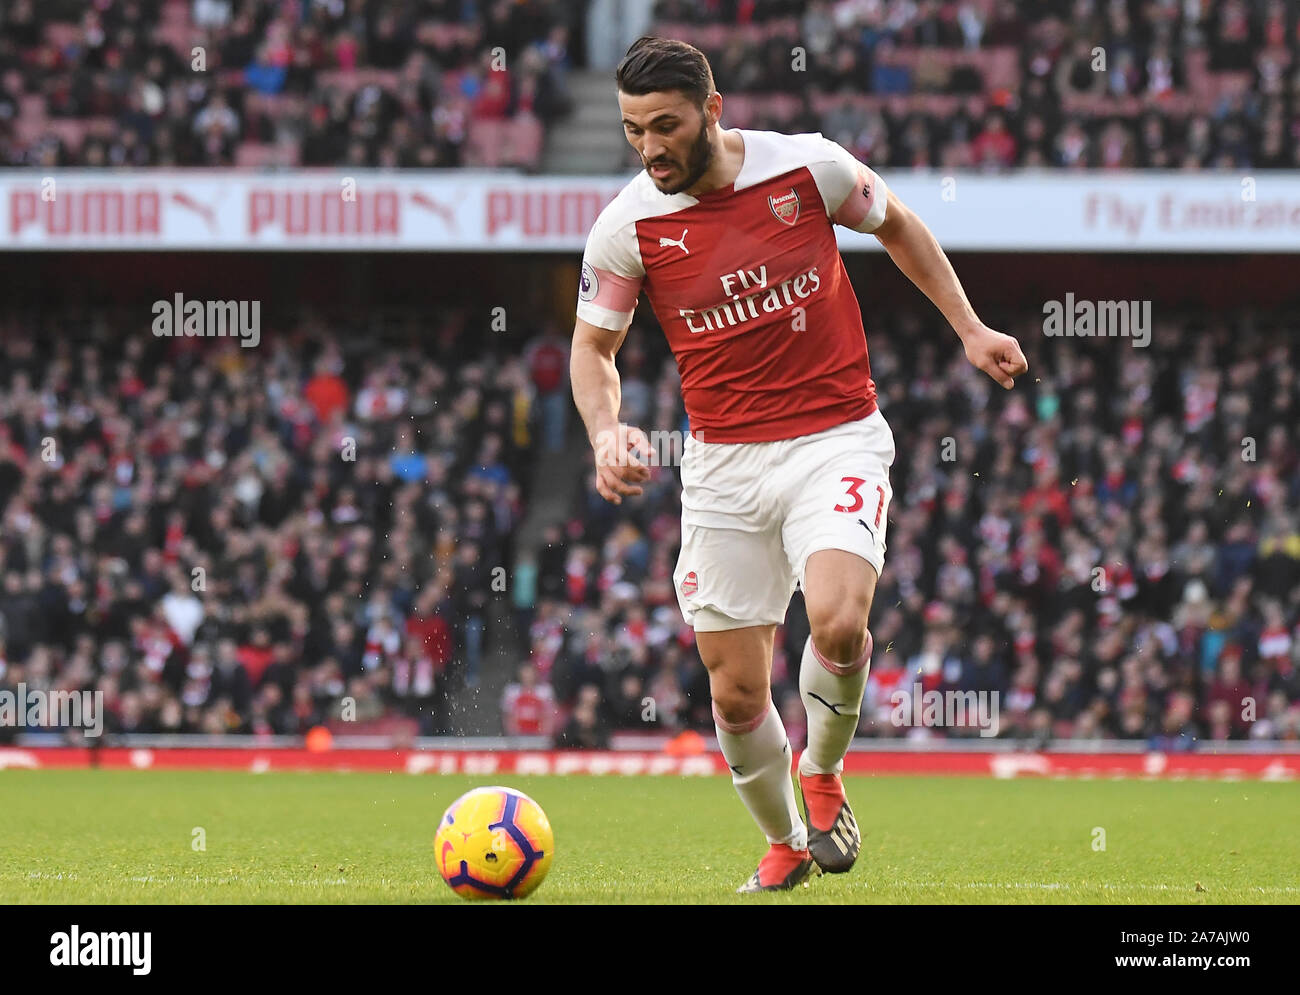 LONDON, ENGLAND - DECEMBER 22, 2018: Sead Kolasinac of Arsenal pictured during the 2018/19 Premier League game between Arsenal FC and Burnley FC at Emirates Stadium. Stock Photo